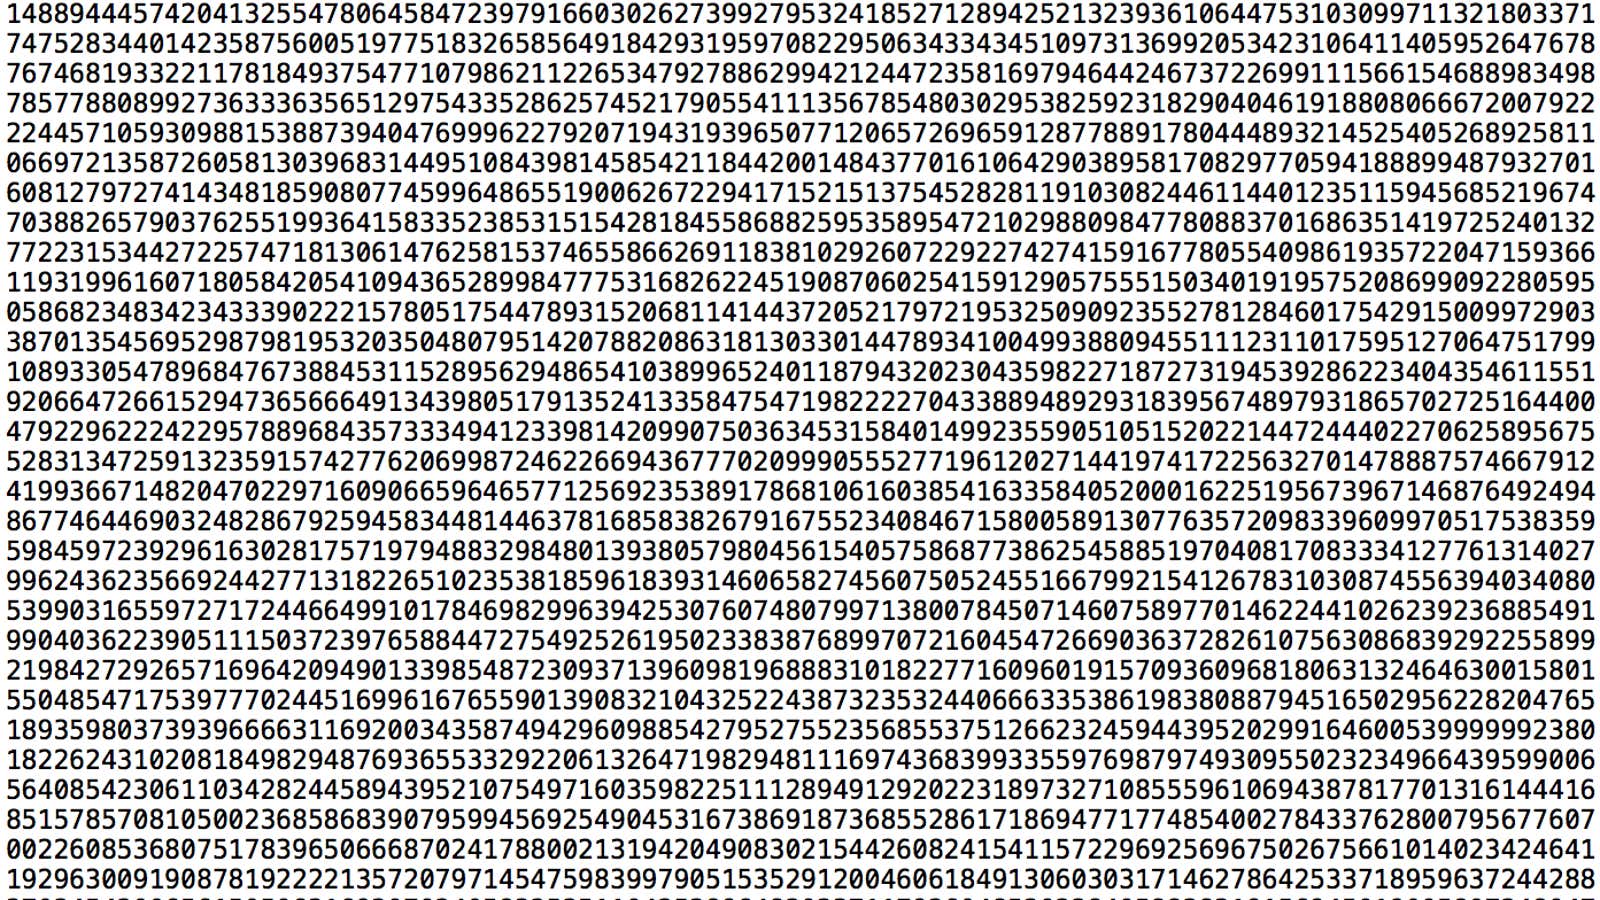 A sliver of the largest known prime number.